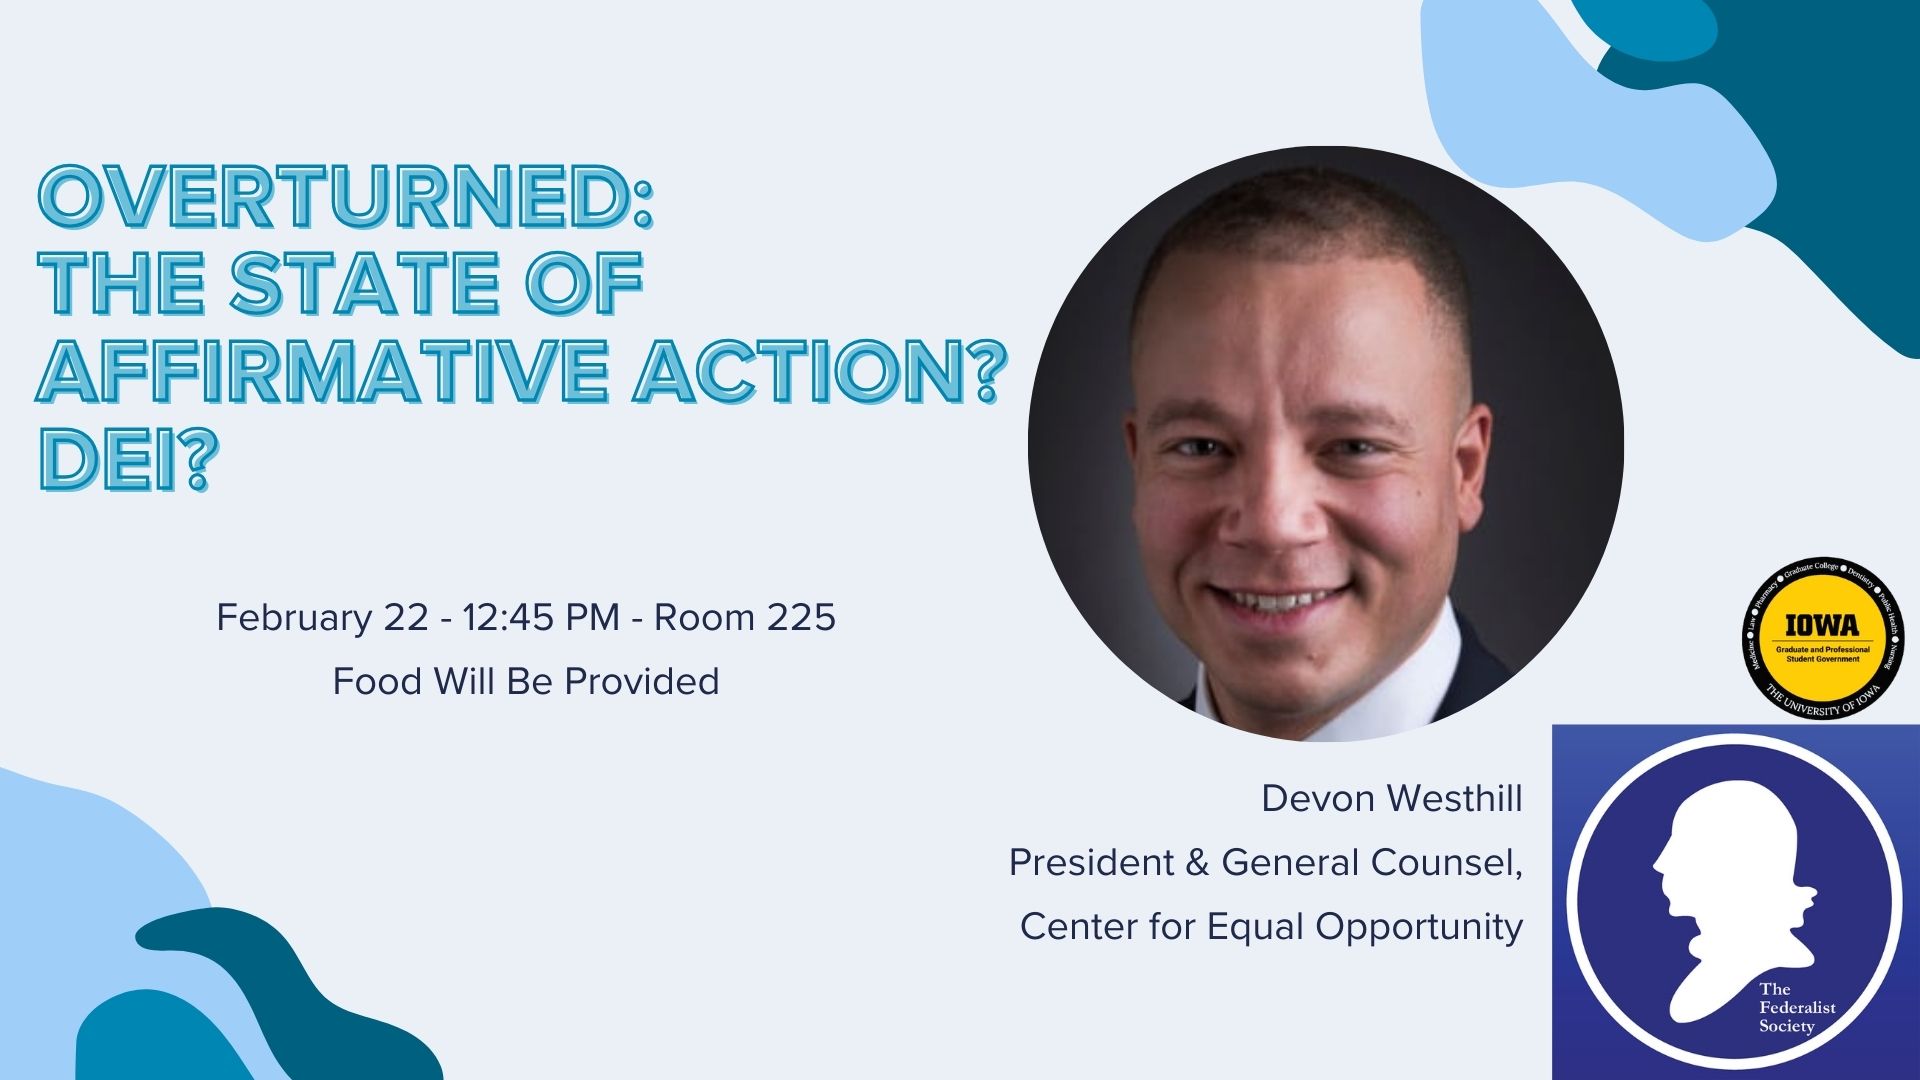    Federalist Society hosts Devon Westhill on February 22nd at 12:45 PM in room 225. Mr. Westhill is the president and general counsel for the Center for Equal Opportunity. He will be speaking on a talk titled "Overturned: The State of Affirmative Action?